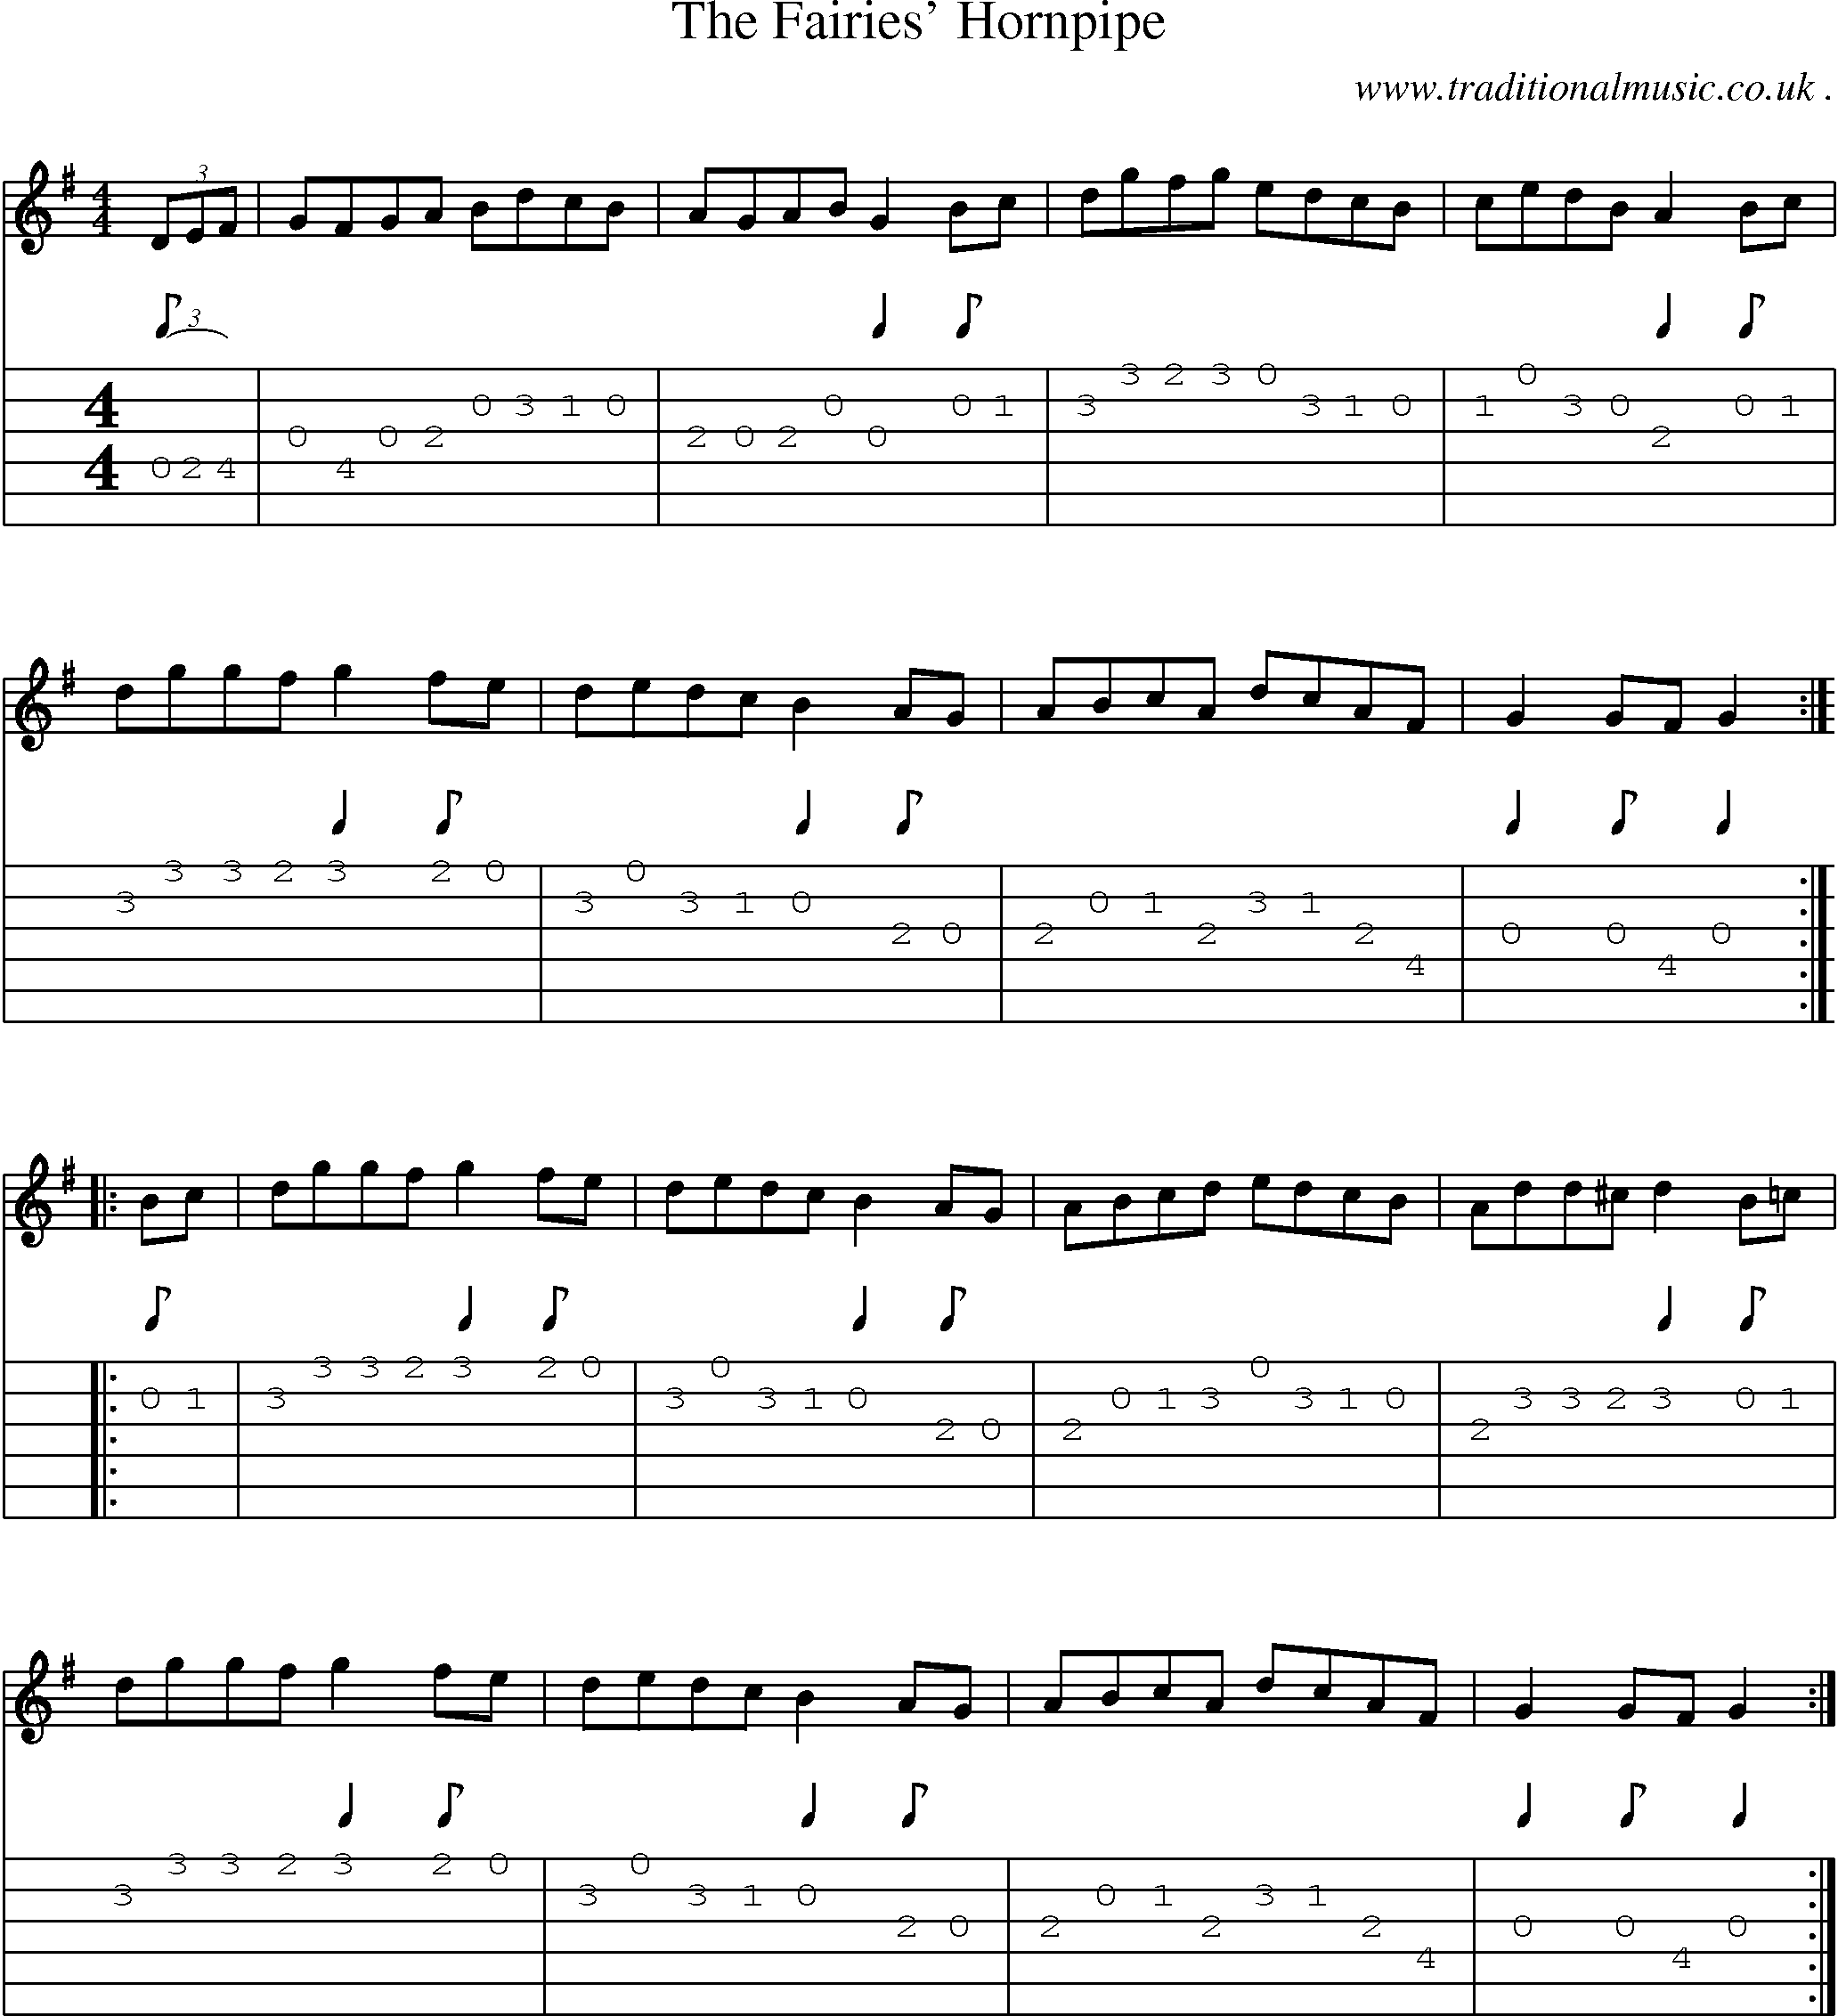 Sheet-Music and Guitar Tabs for The Fairies Hornpipe